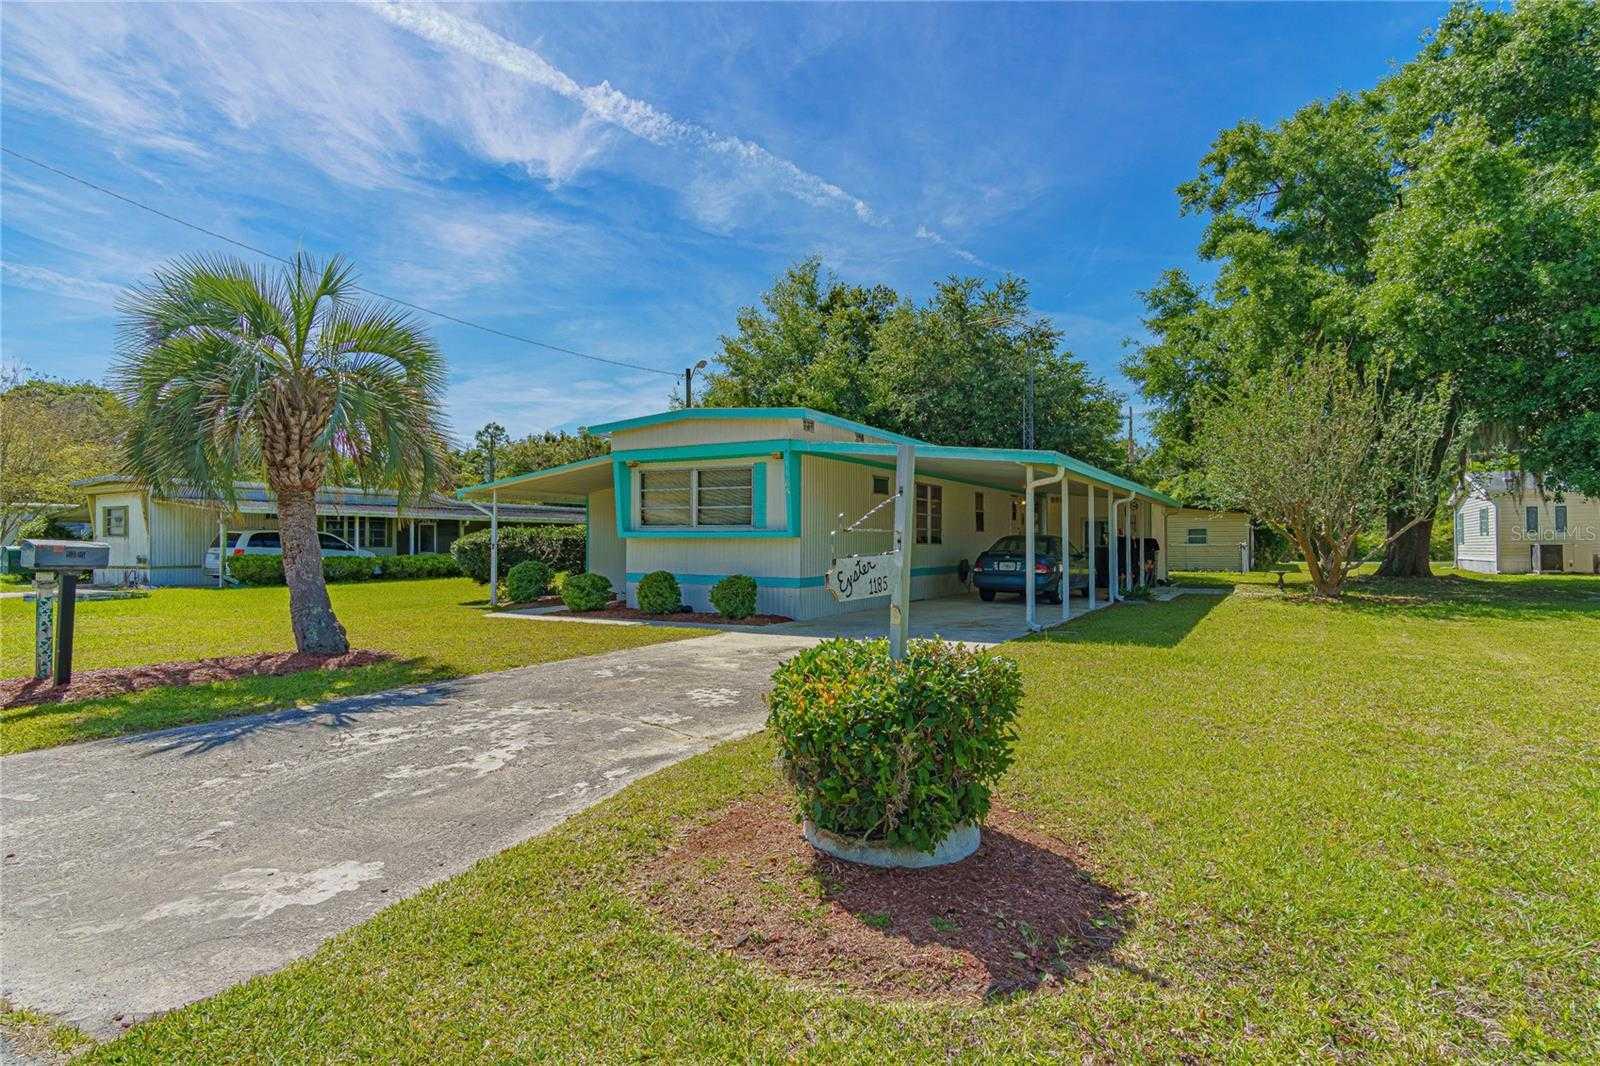 1185 CR 440A, LAKE PANASOFFKEE, Mobile Home - Pre 1976,  for sale, Natalie Amento, PA, Florida Realty Investments